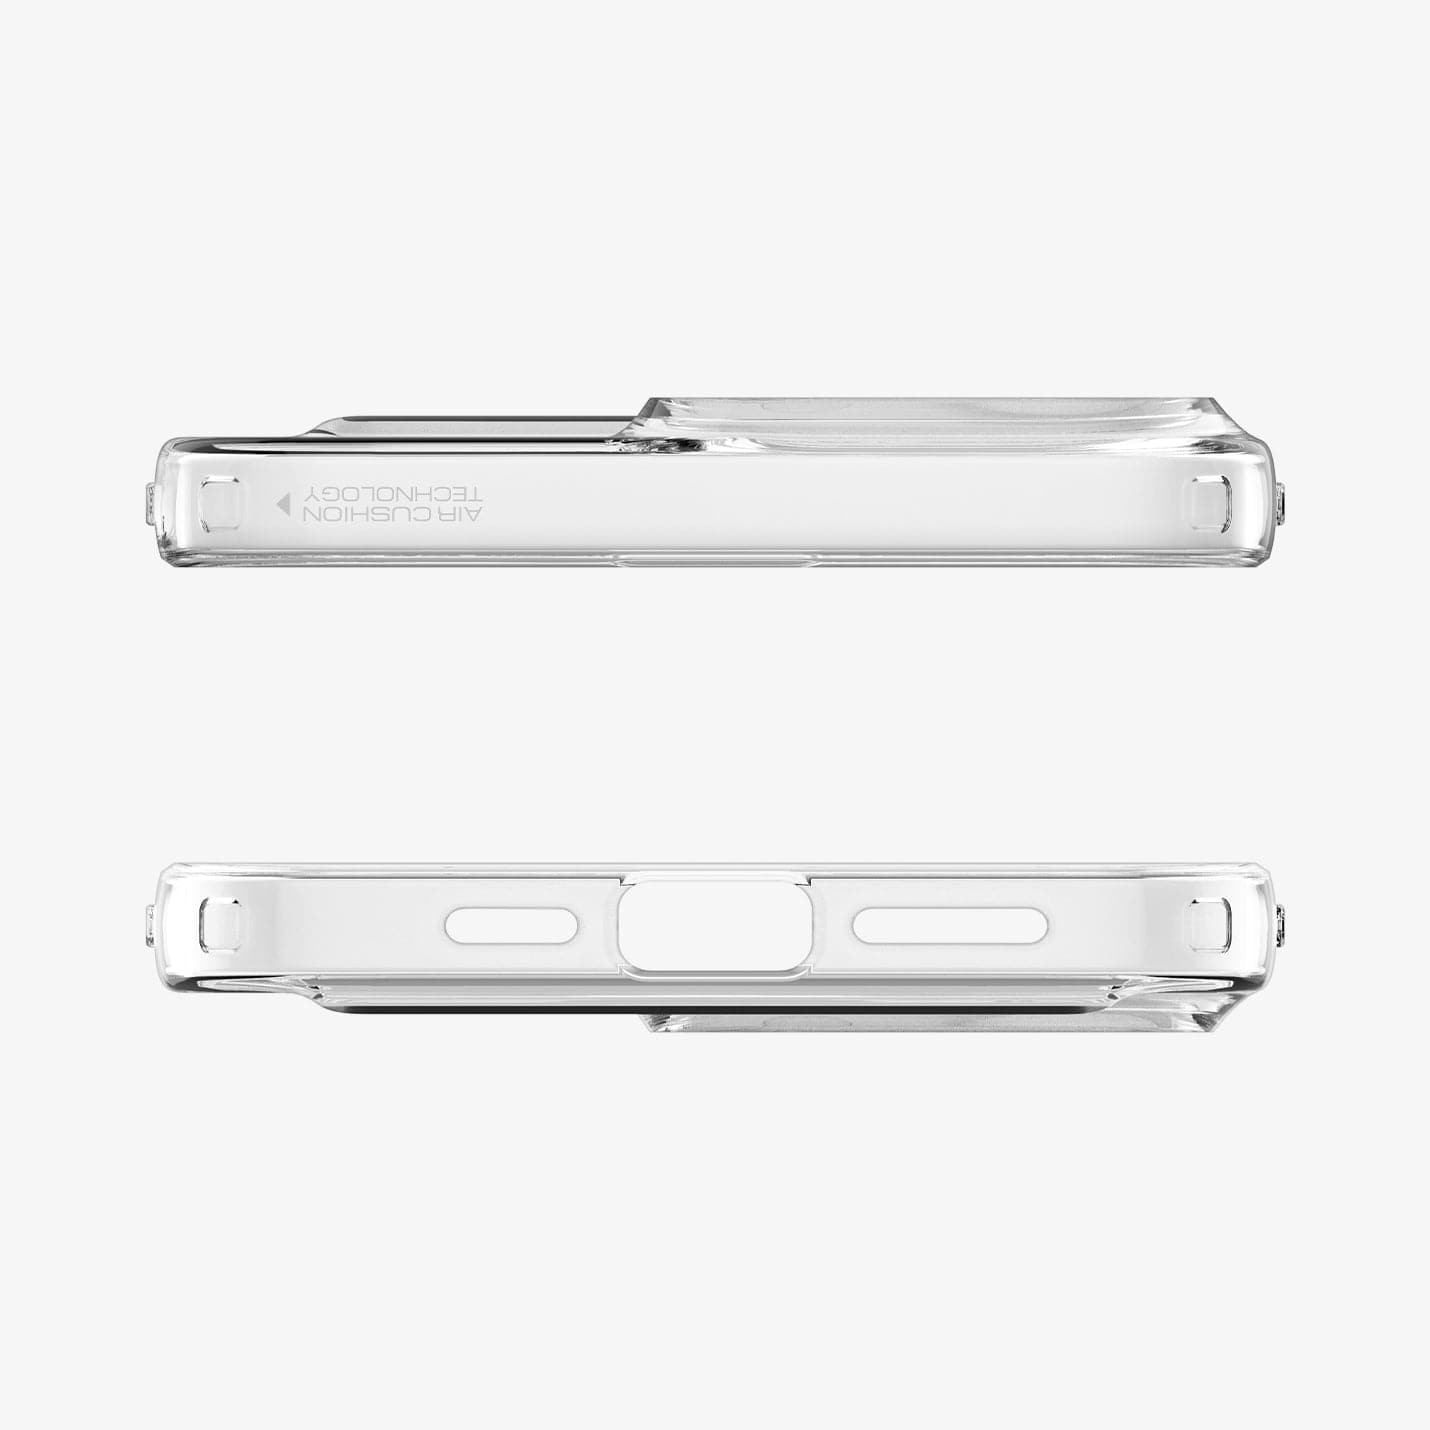 ACS04832 - iPhone 14 Pro Max Case Crystal Slot in crystal clear showing the top and bottom with precise cutouts